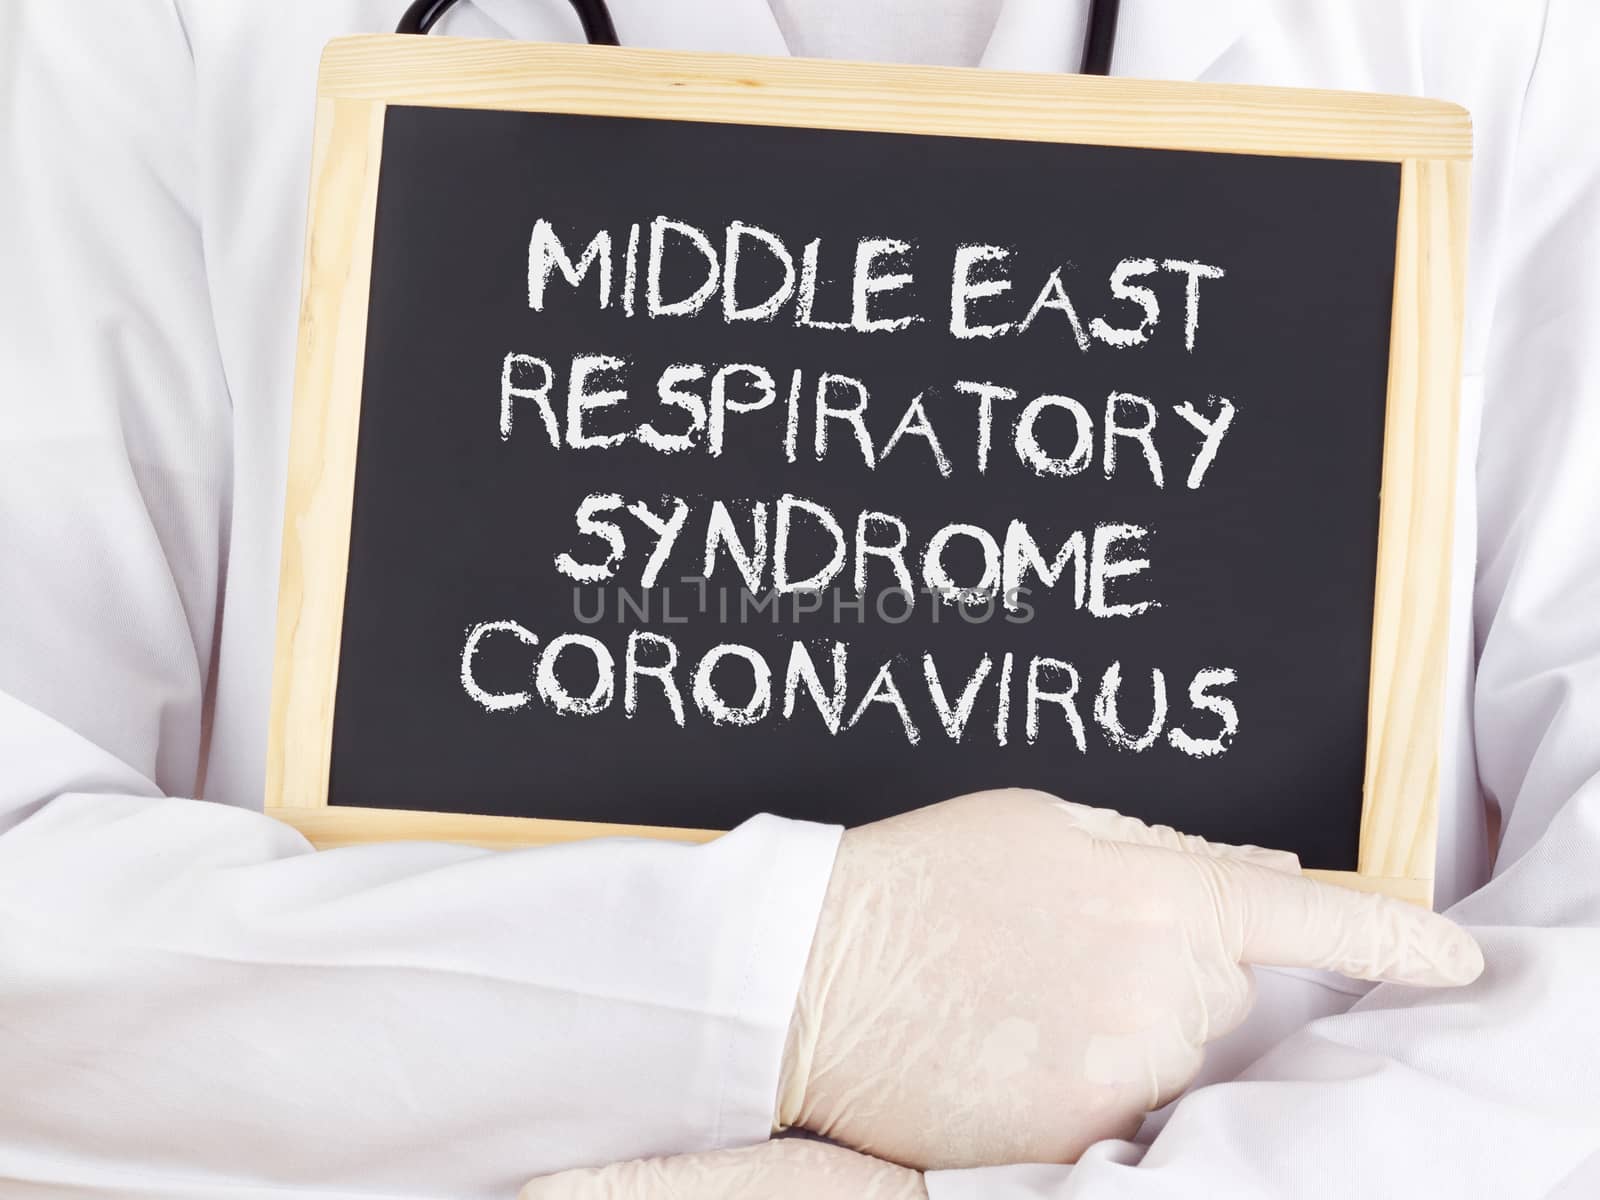 Middle east respiratory syndrome coronavirus by gwolters